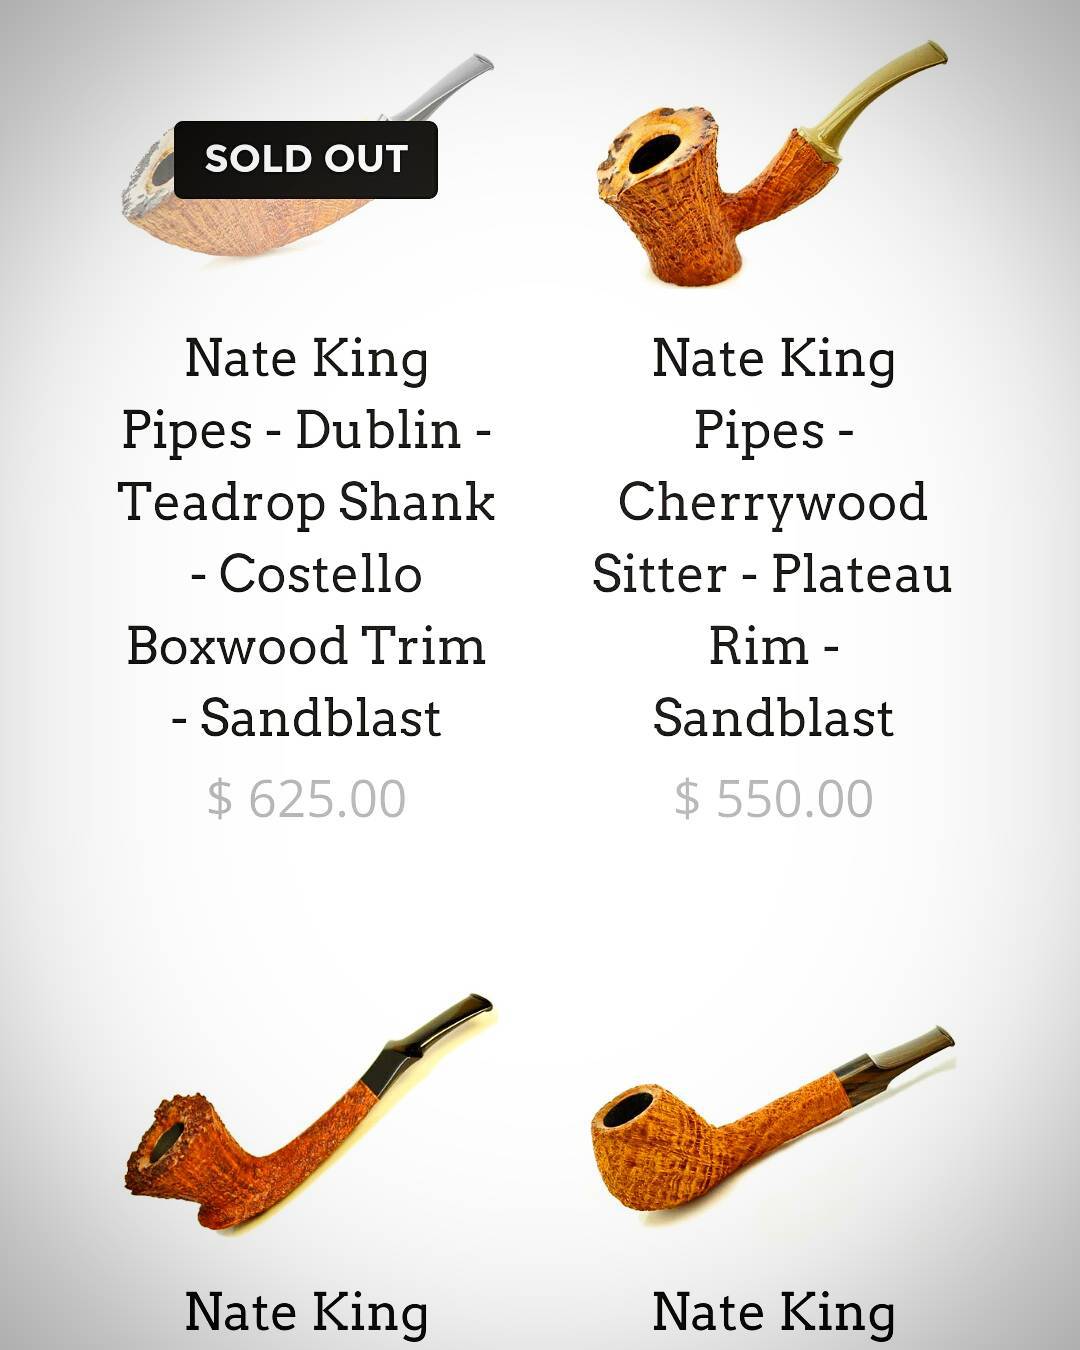 Three great pipes still available after the holidays on briarlab.com! 
http://www.briarlab.com/collections/nate-king